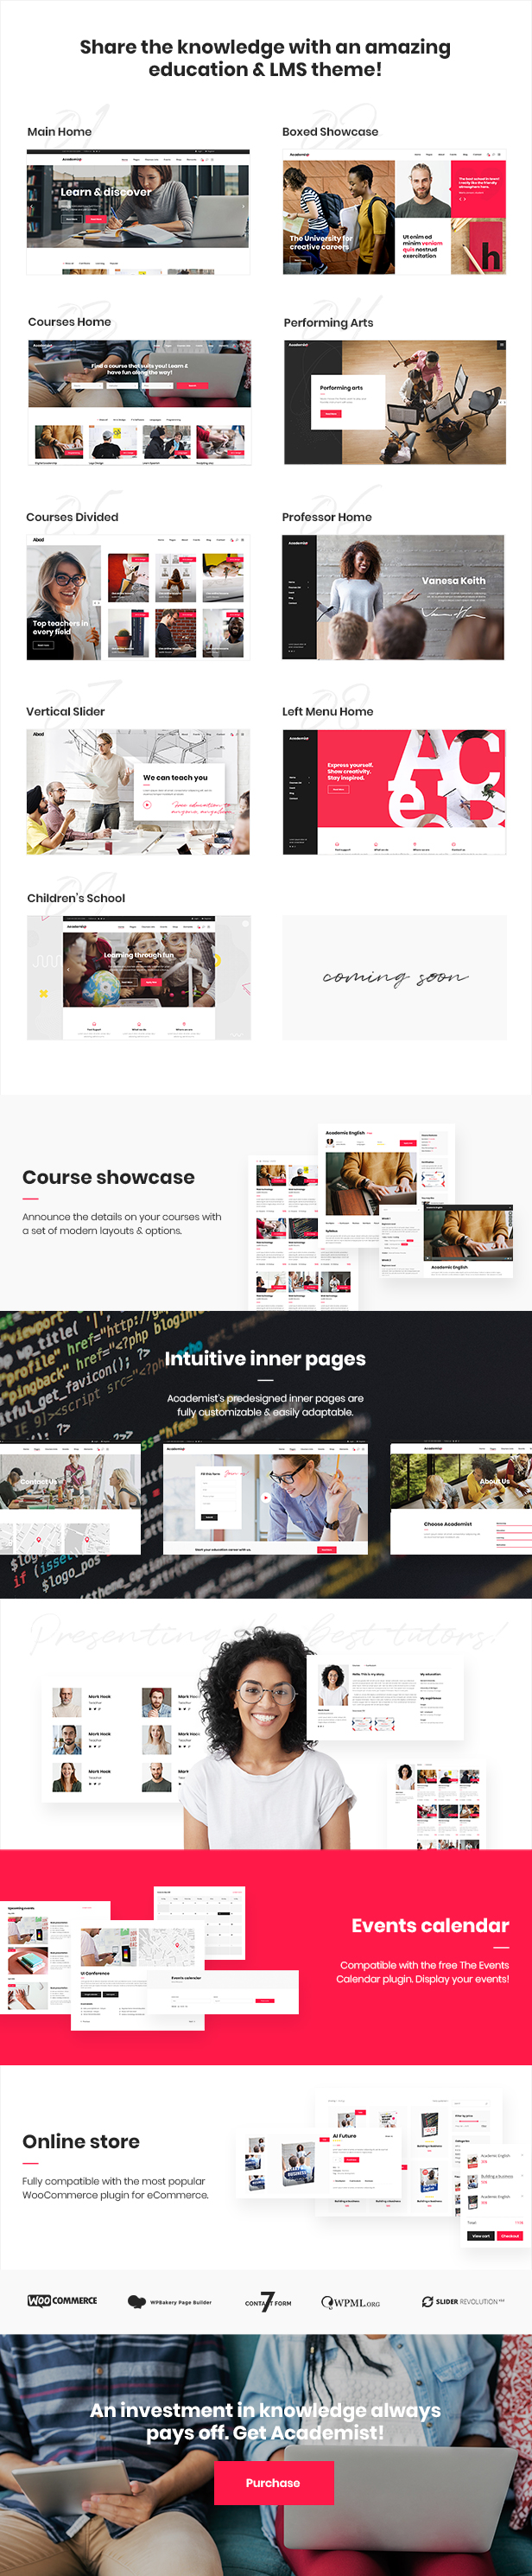 01a - Academist - Education & Learning Management System Theme